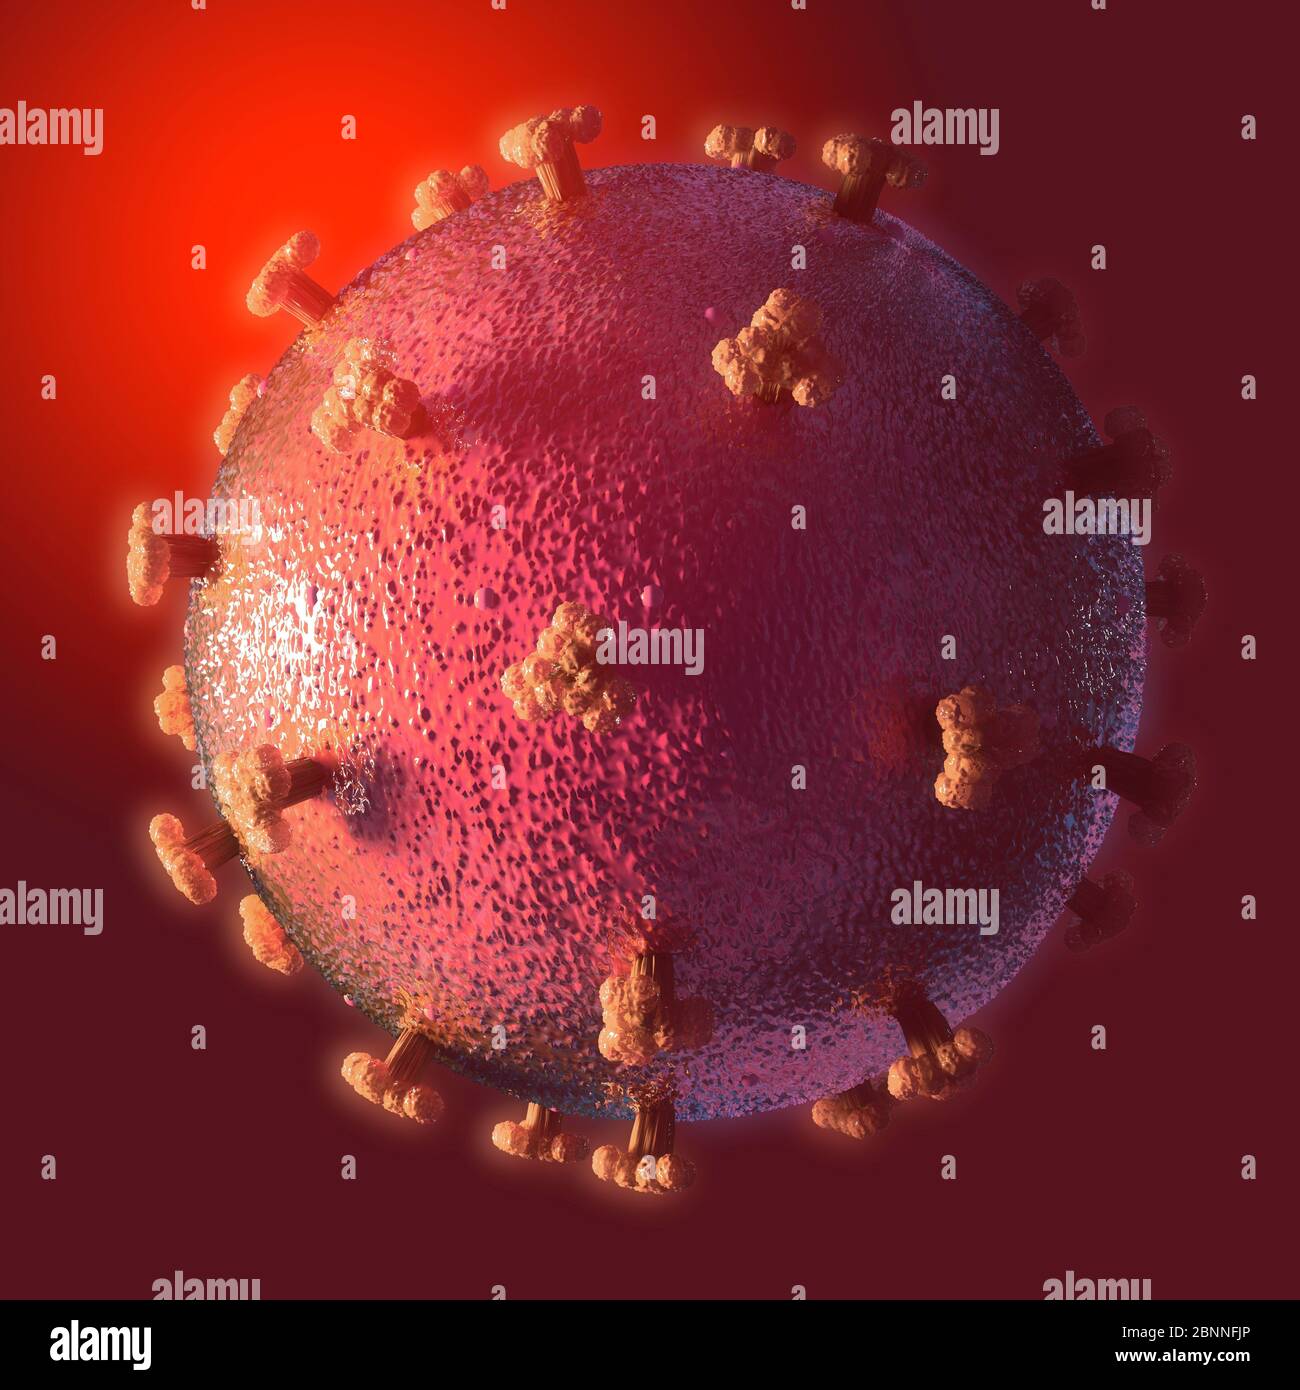 Illustration of a coronavirus, the cause of the new disease covid-19. This disease was first detected in Wuhan, China, in December 2019. It is contagious and has since spread rapidly around the world. The disease causes fever, cough and shortness of breath, and can lead to fatal pneumonia in some cases. SARS-CoV-2 is an RNA virus that uses protein spikes to gain entry to host cells. Stock Photo